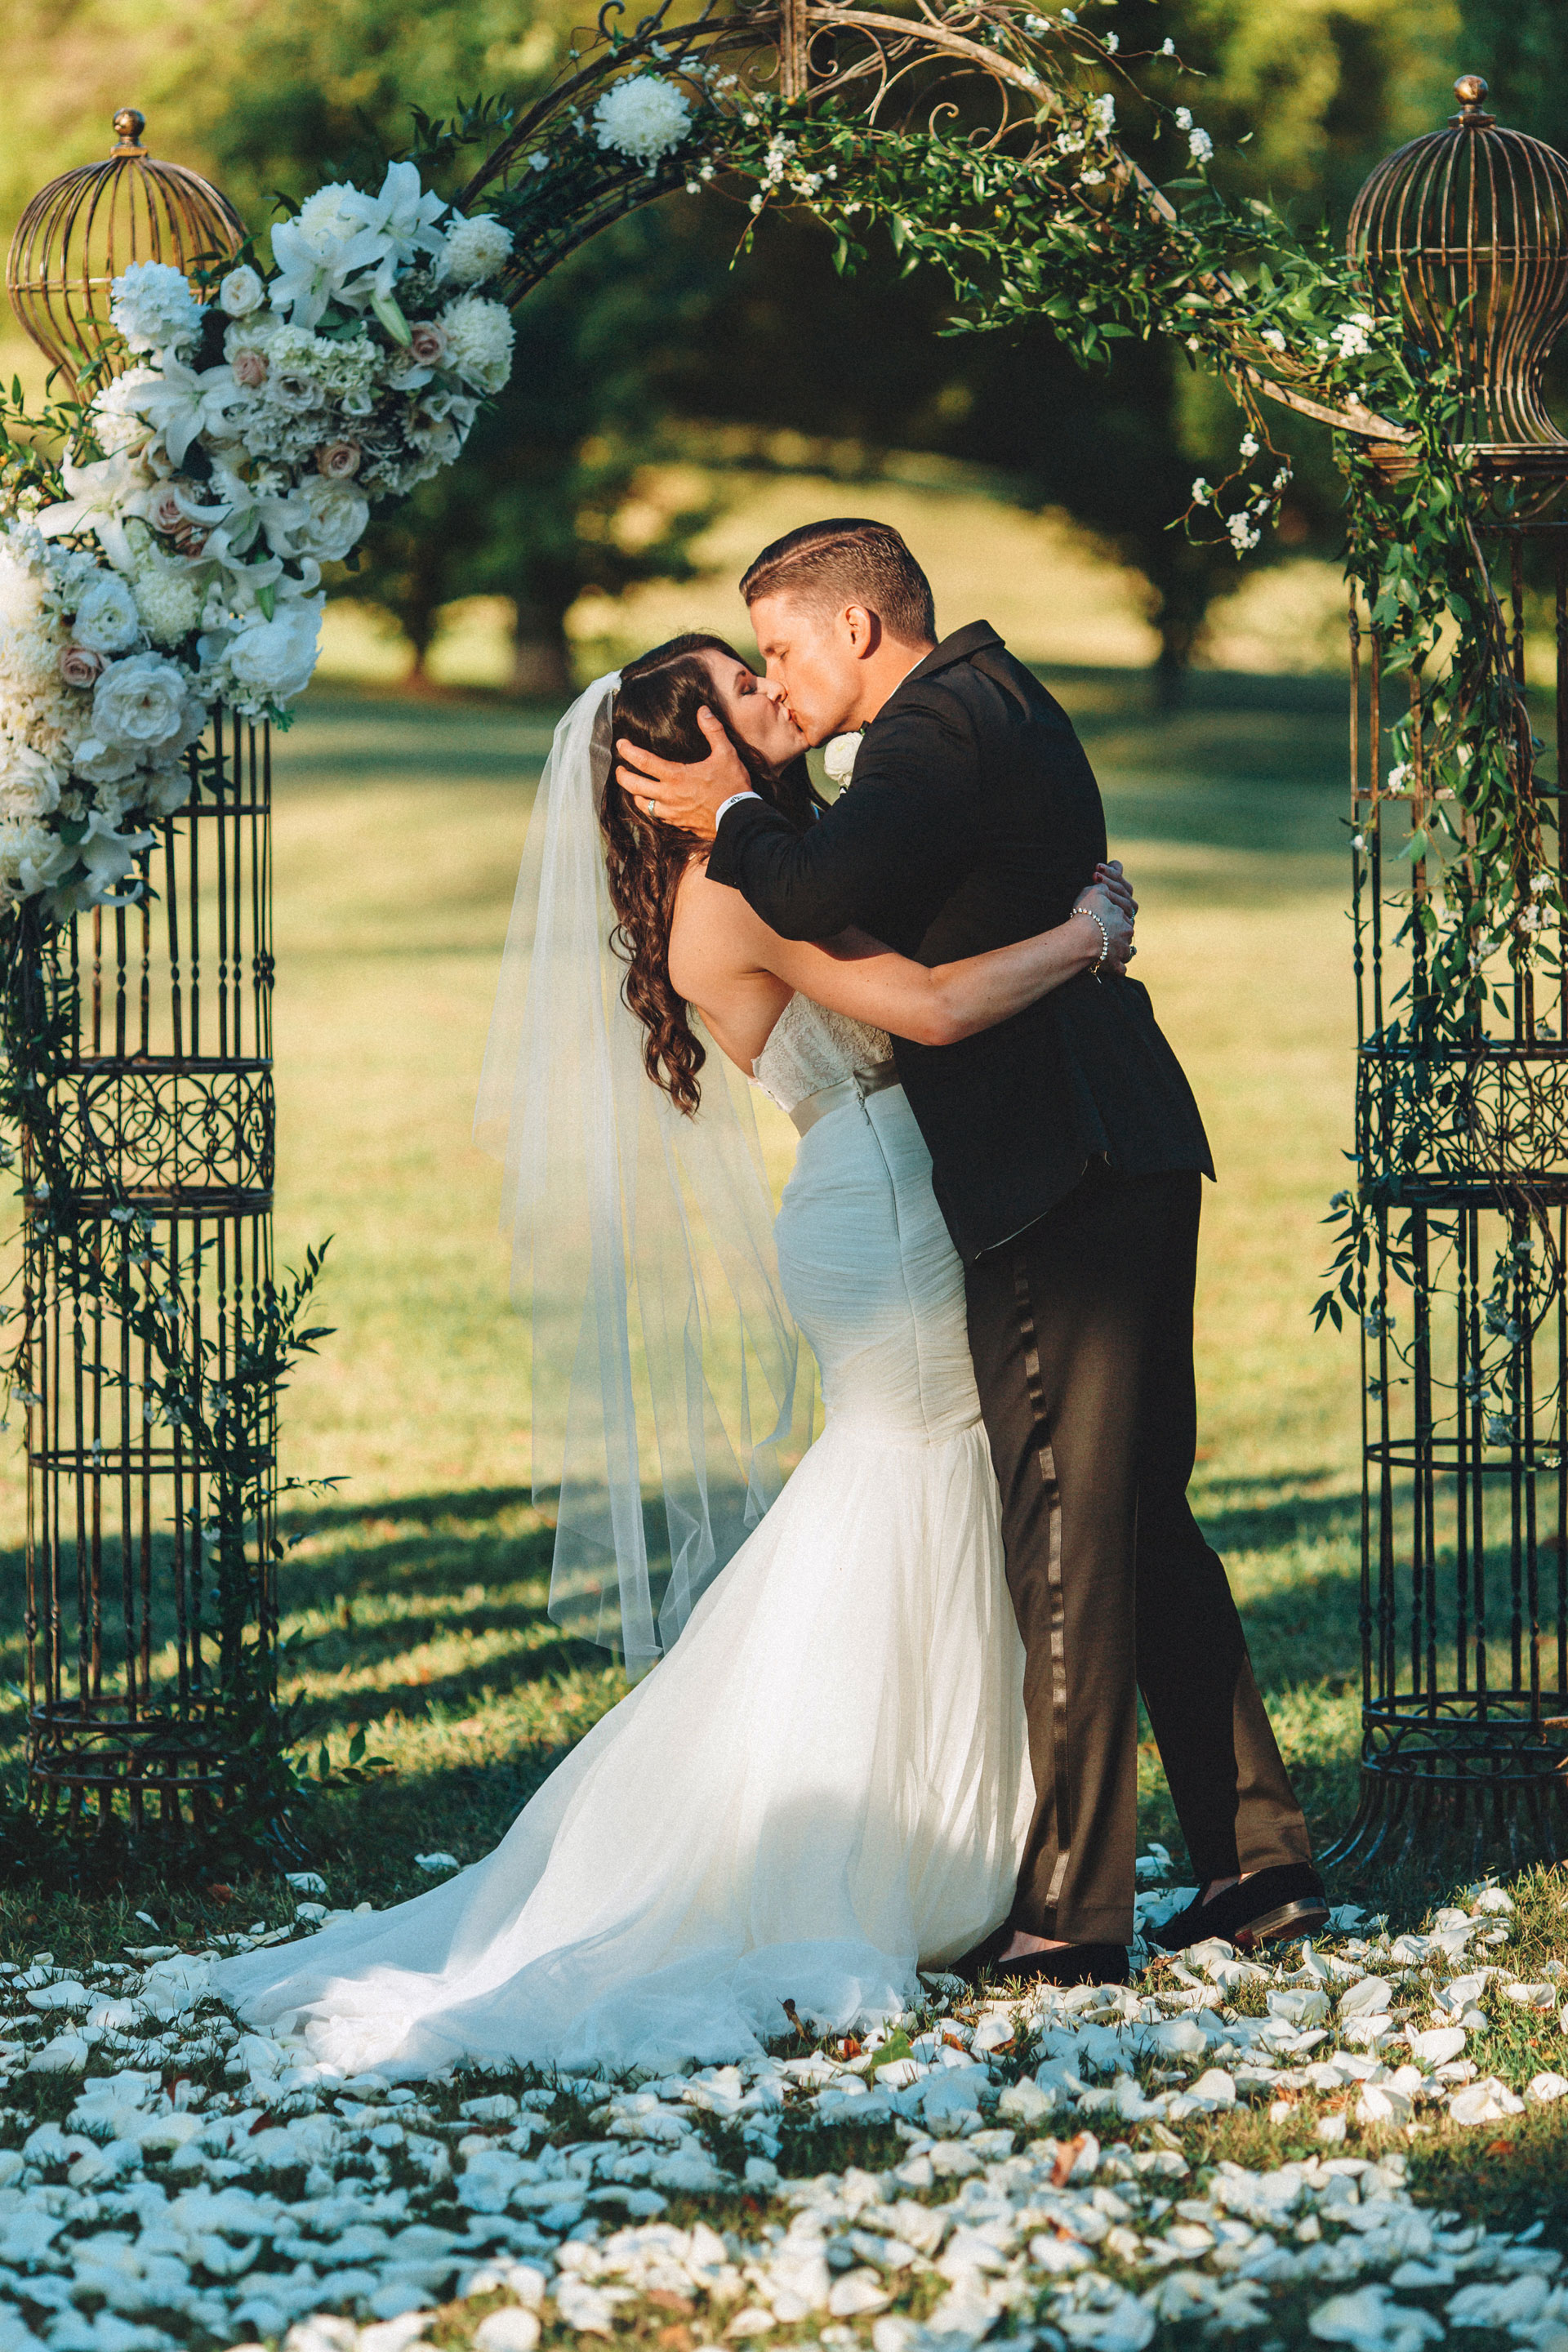 Me & Mr. Jones Wedding, Love Veil, First Kiss, Rustic Glam Wedding, Ballet Veil, Fountain Veil, Black Tie Wedding, Floral Arch at the Altar, Rose Petal Aisle, Rustic Arch with Flowers